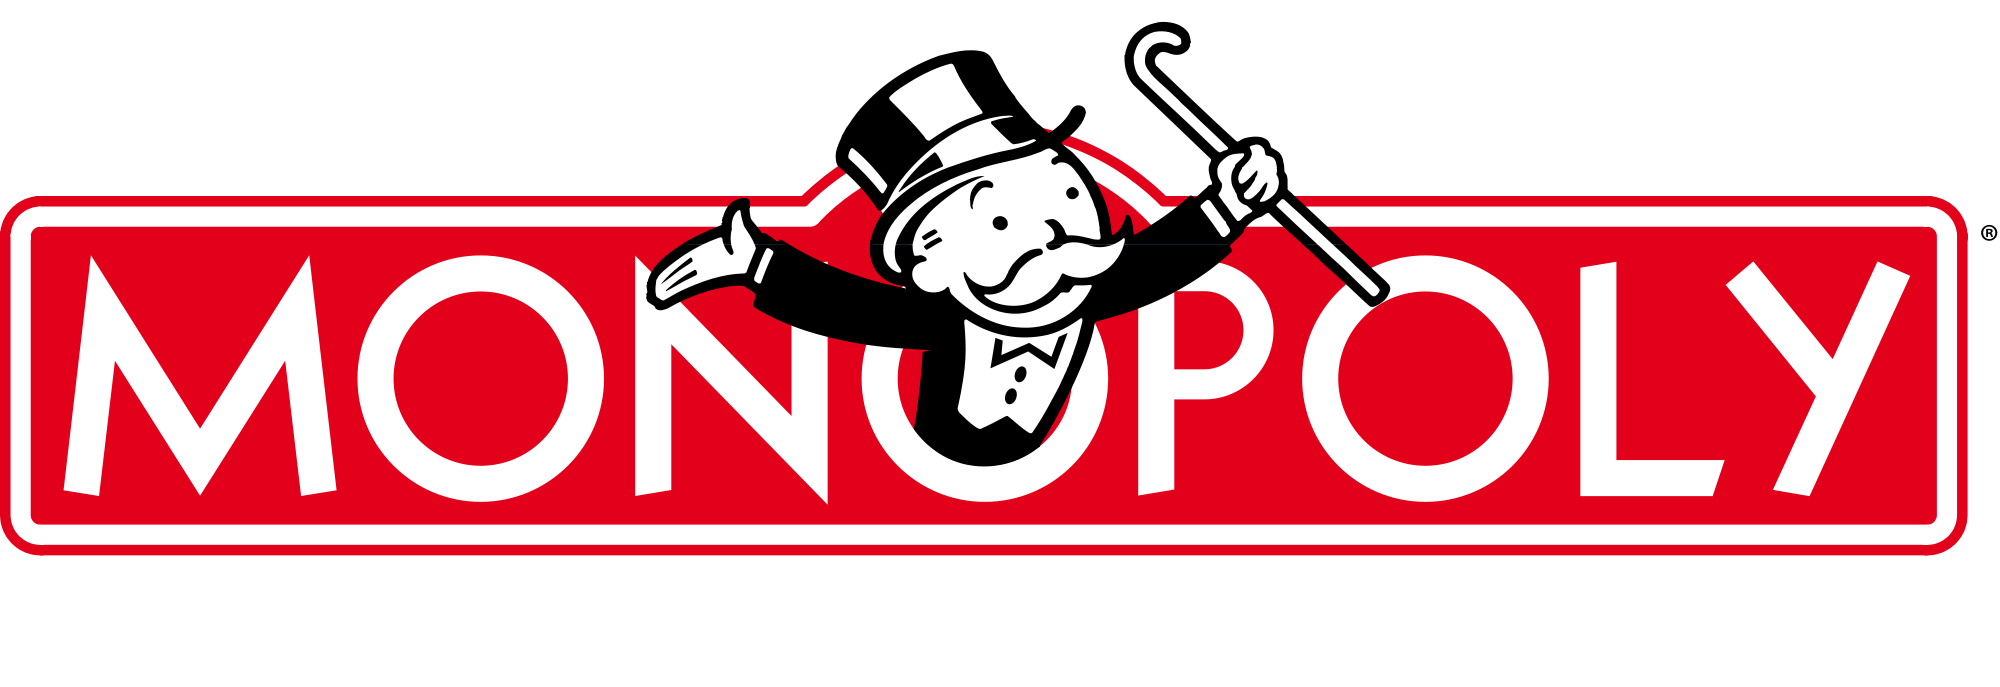 game clipart monopoly board